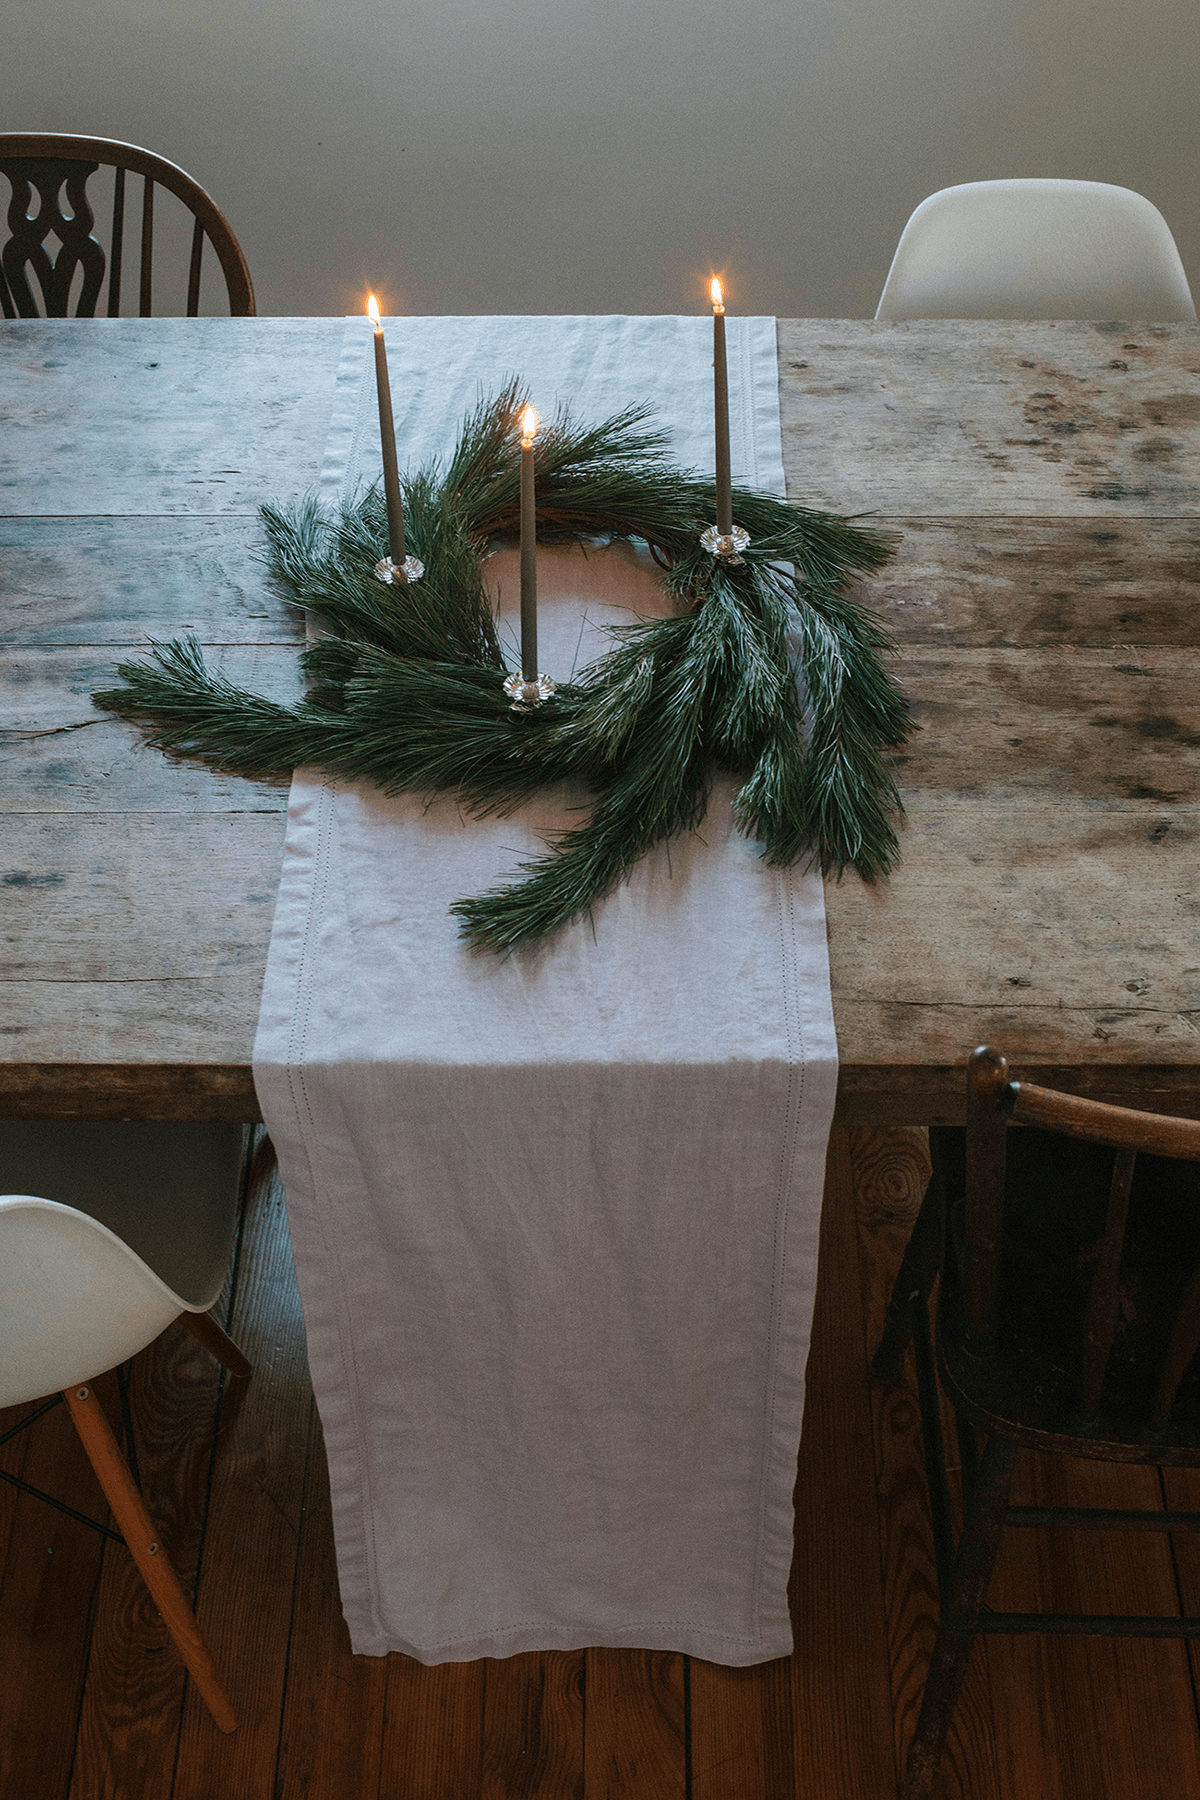 A Simple Arrangement of Wreath and Candles